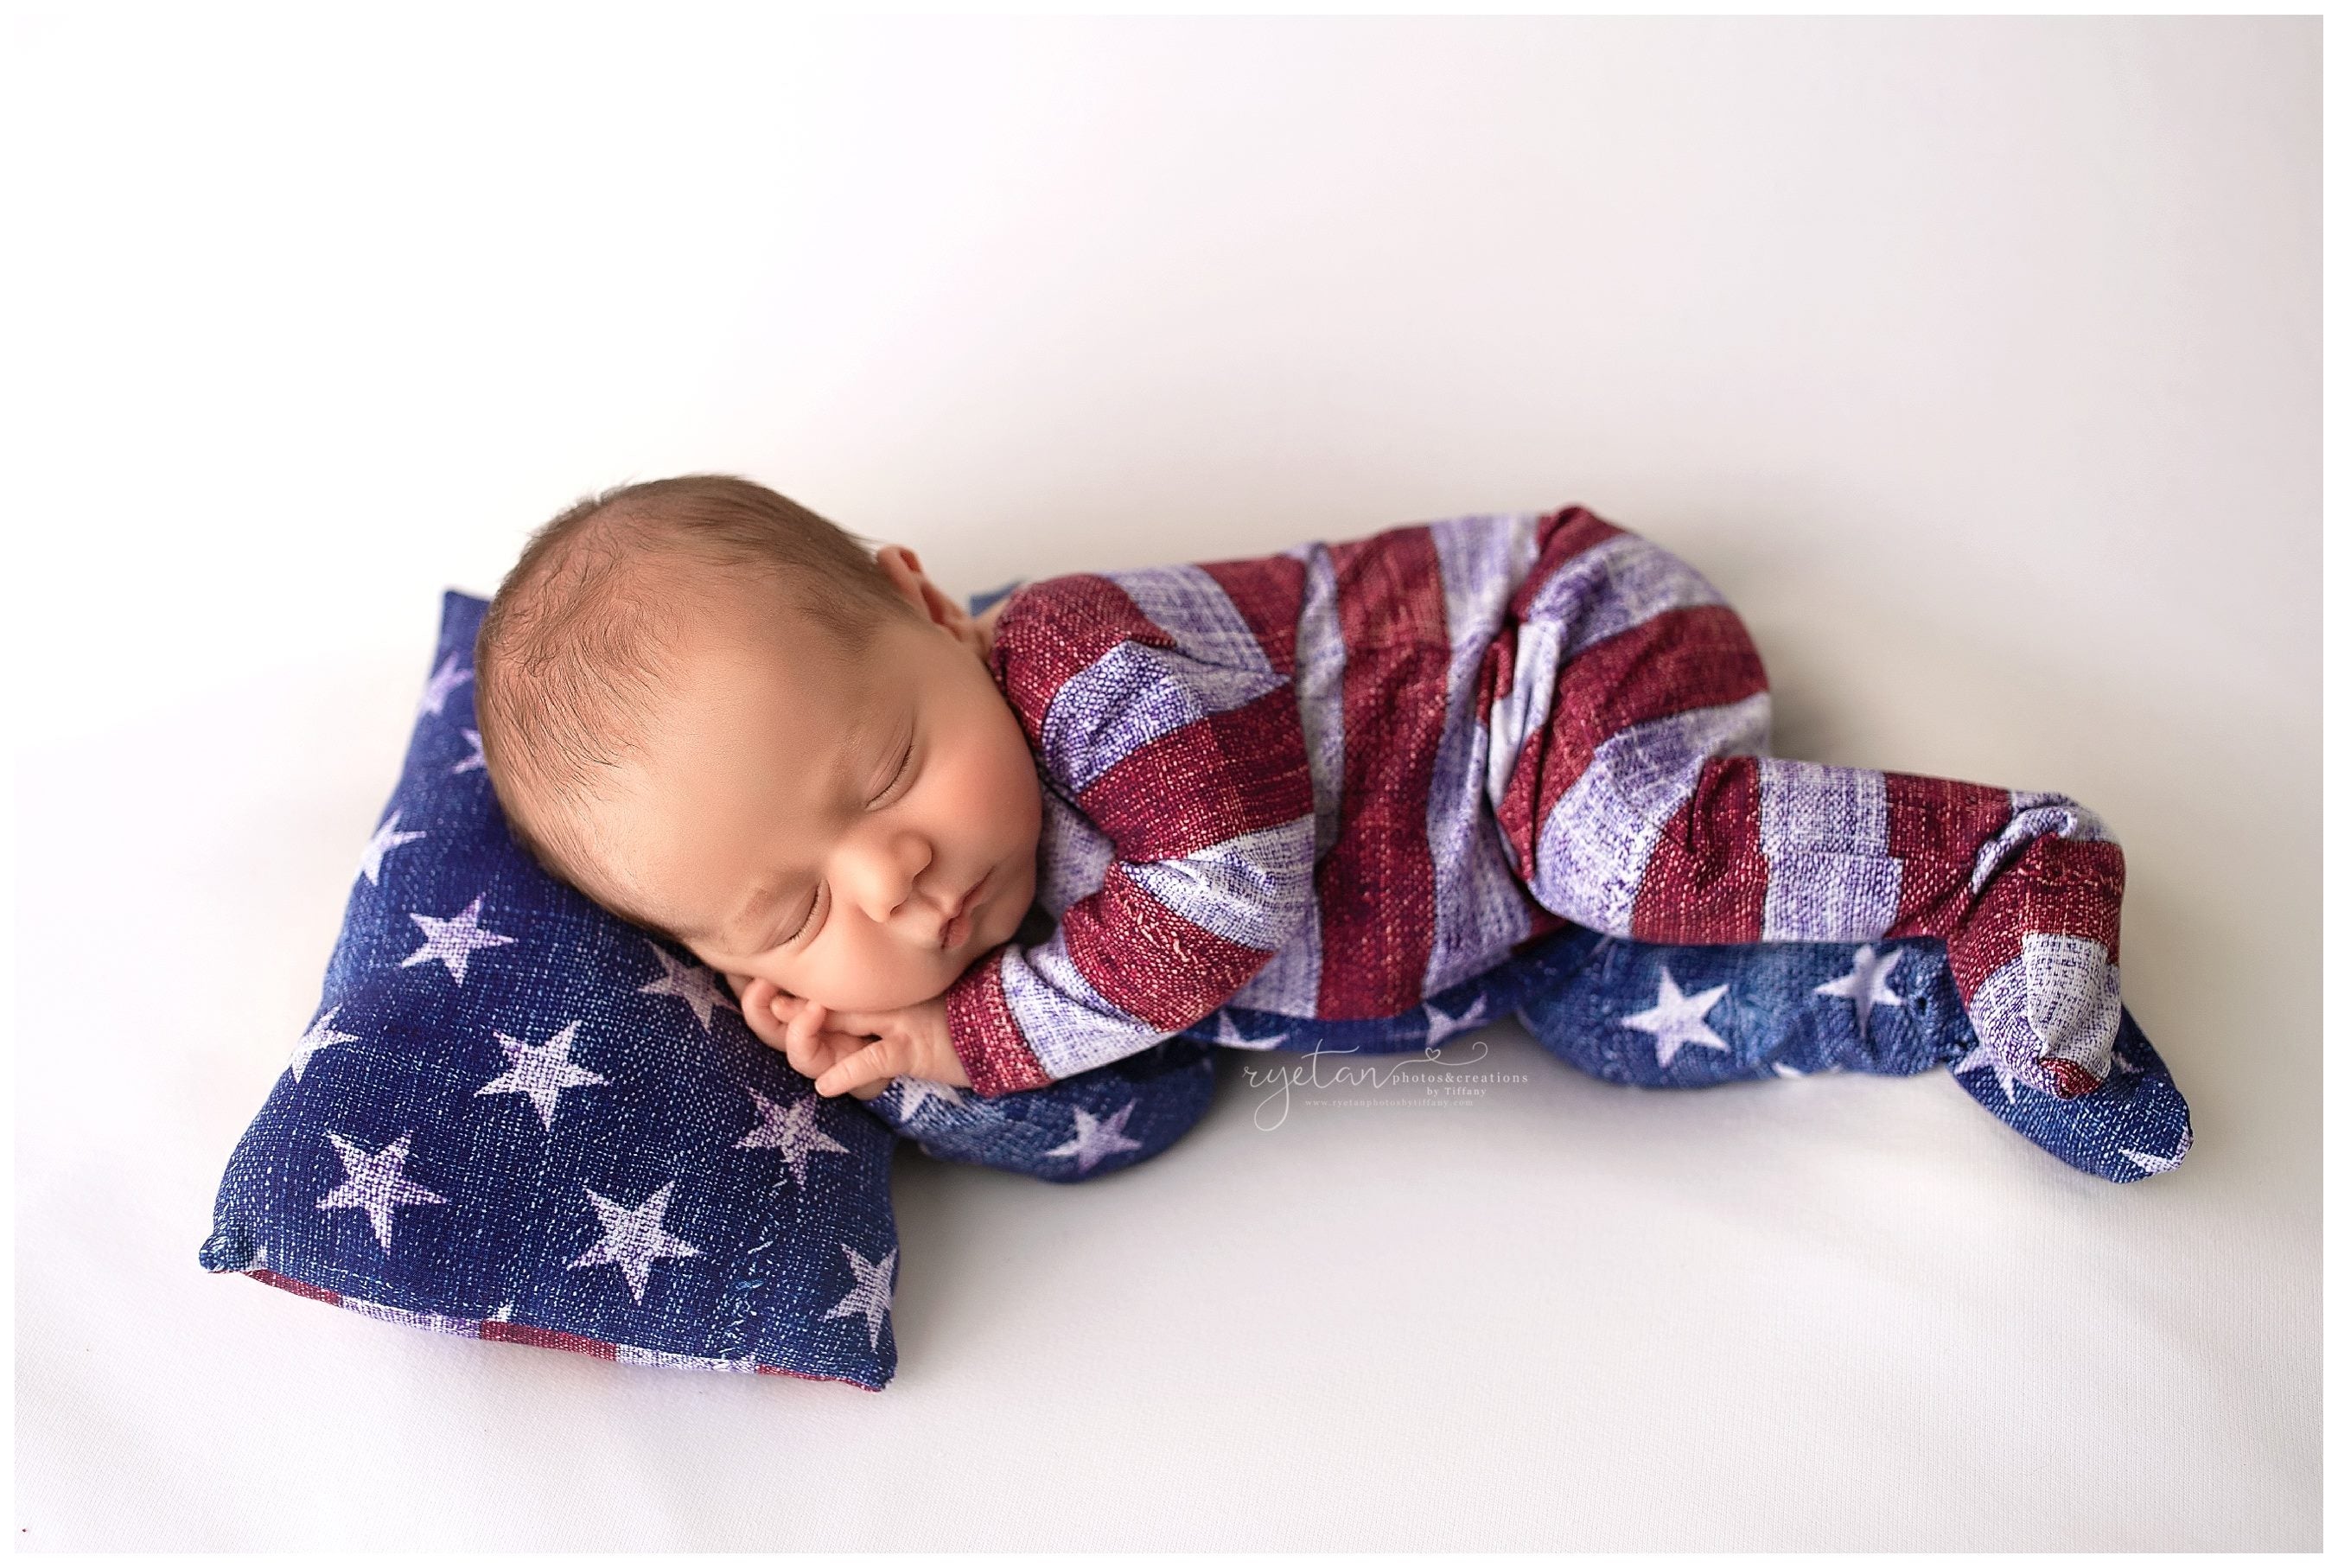 NEW & BRIGHT Stars & Stripes Pillow (9x6)- MADE TO ORDER